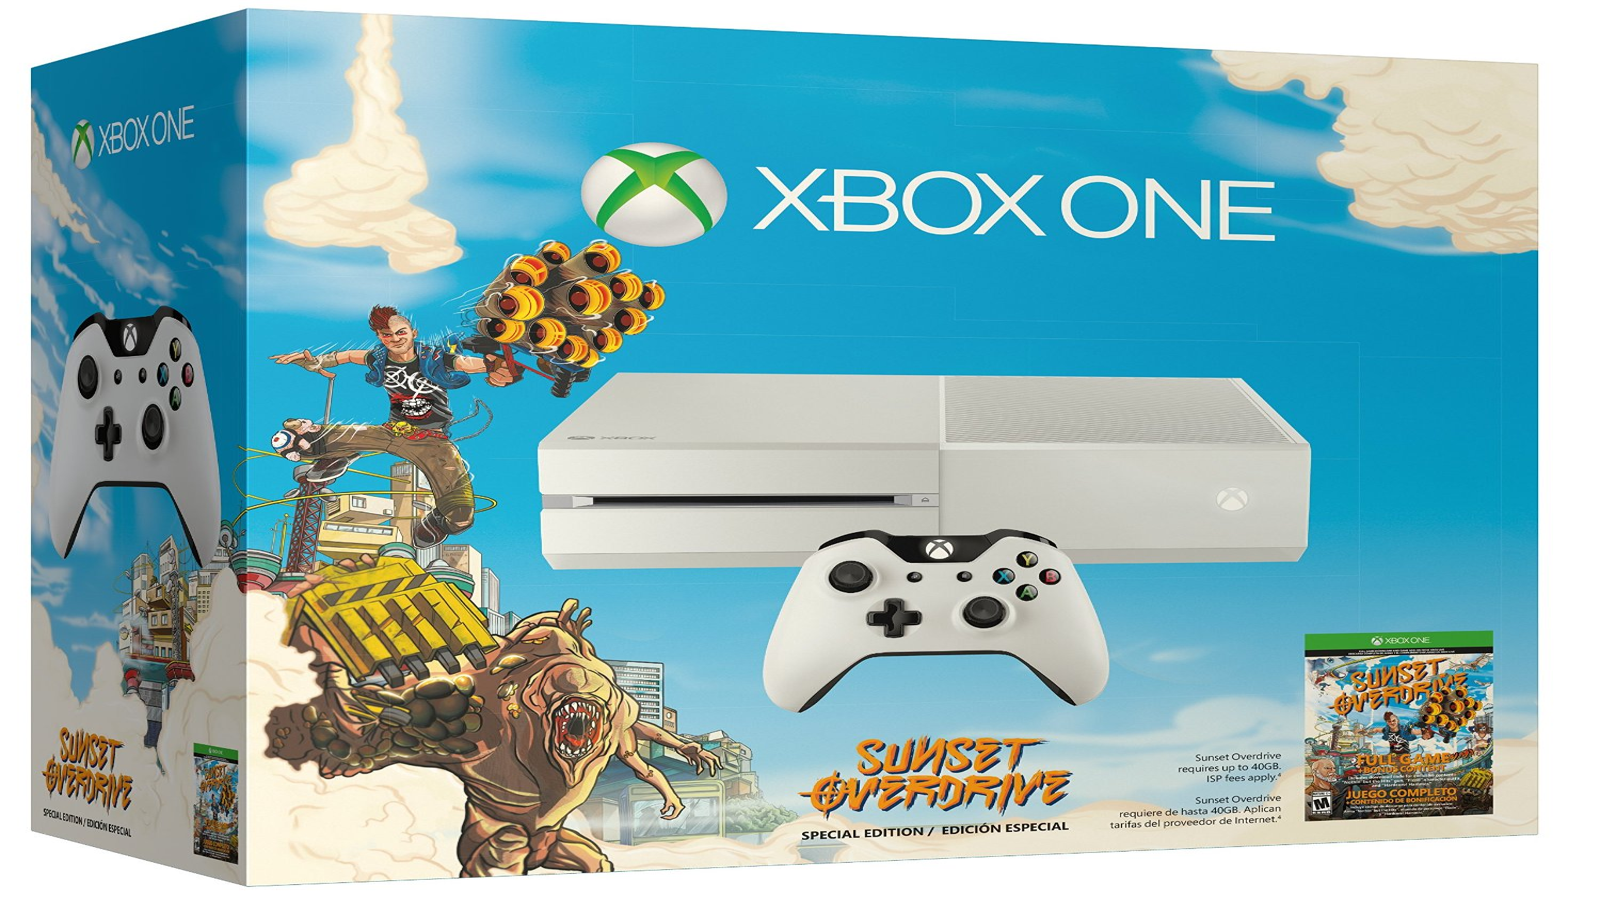 Sunset Overdrive - Day One Edition for XBOX ONE